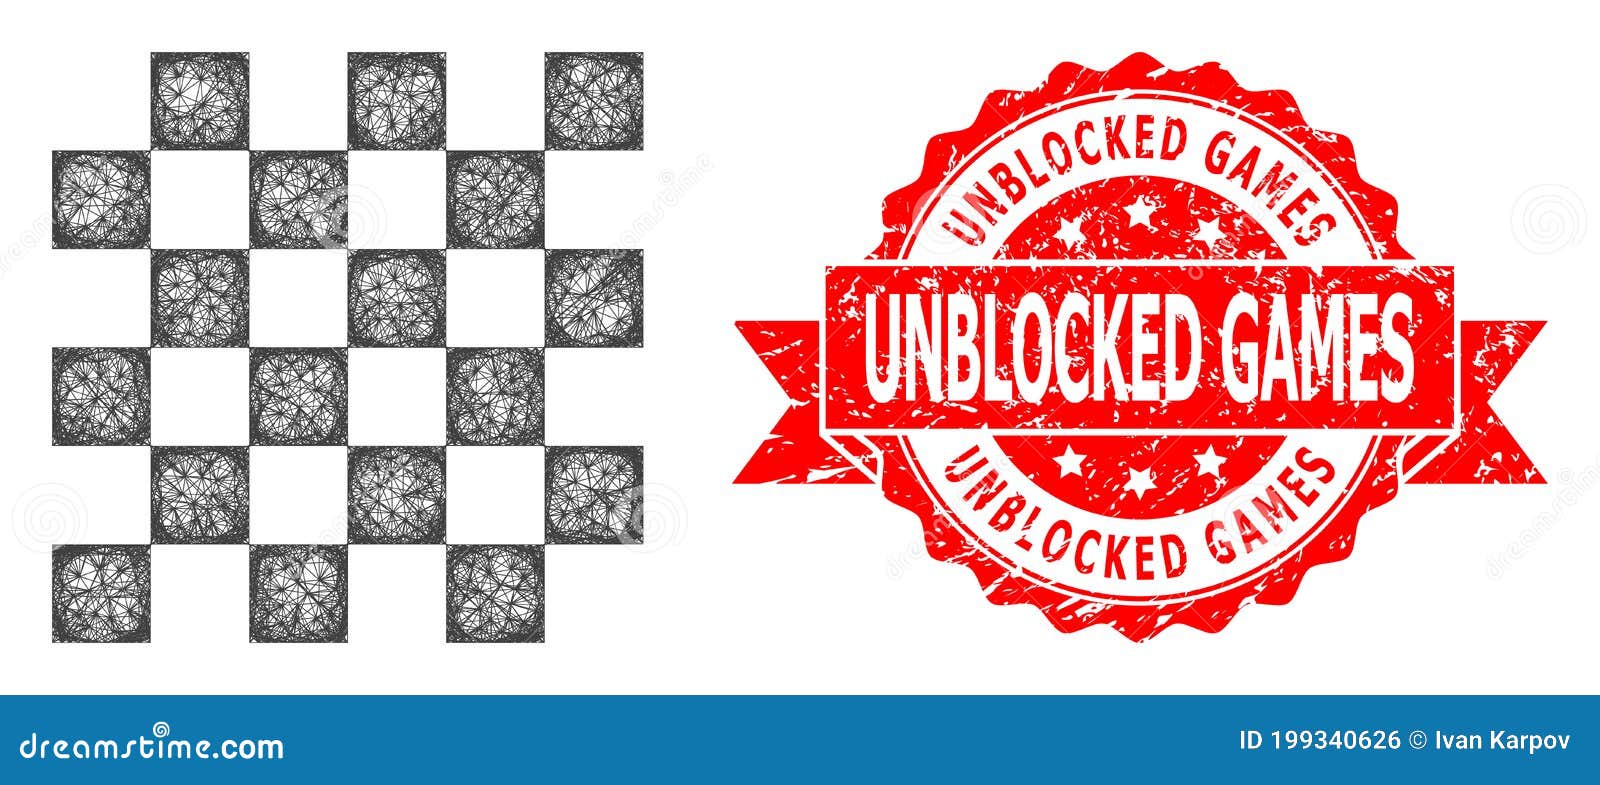 Unblocked Games - Chess